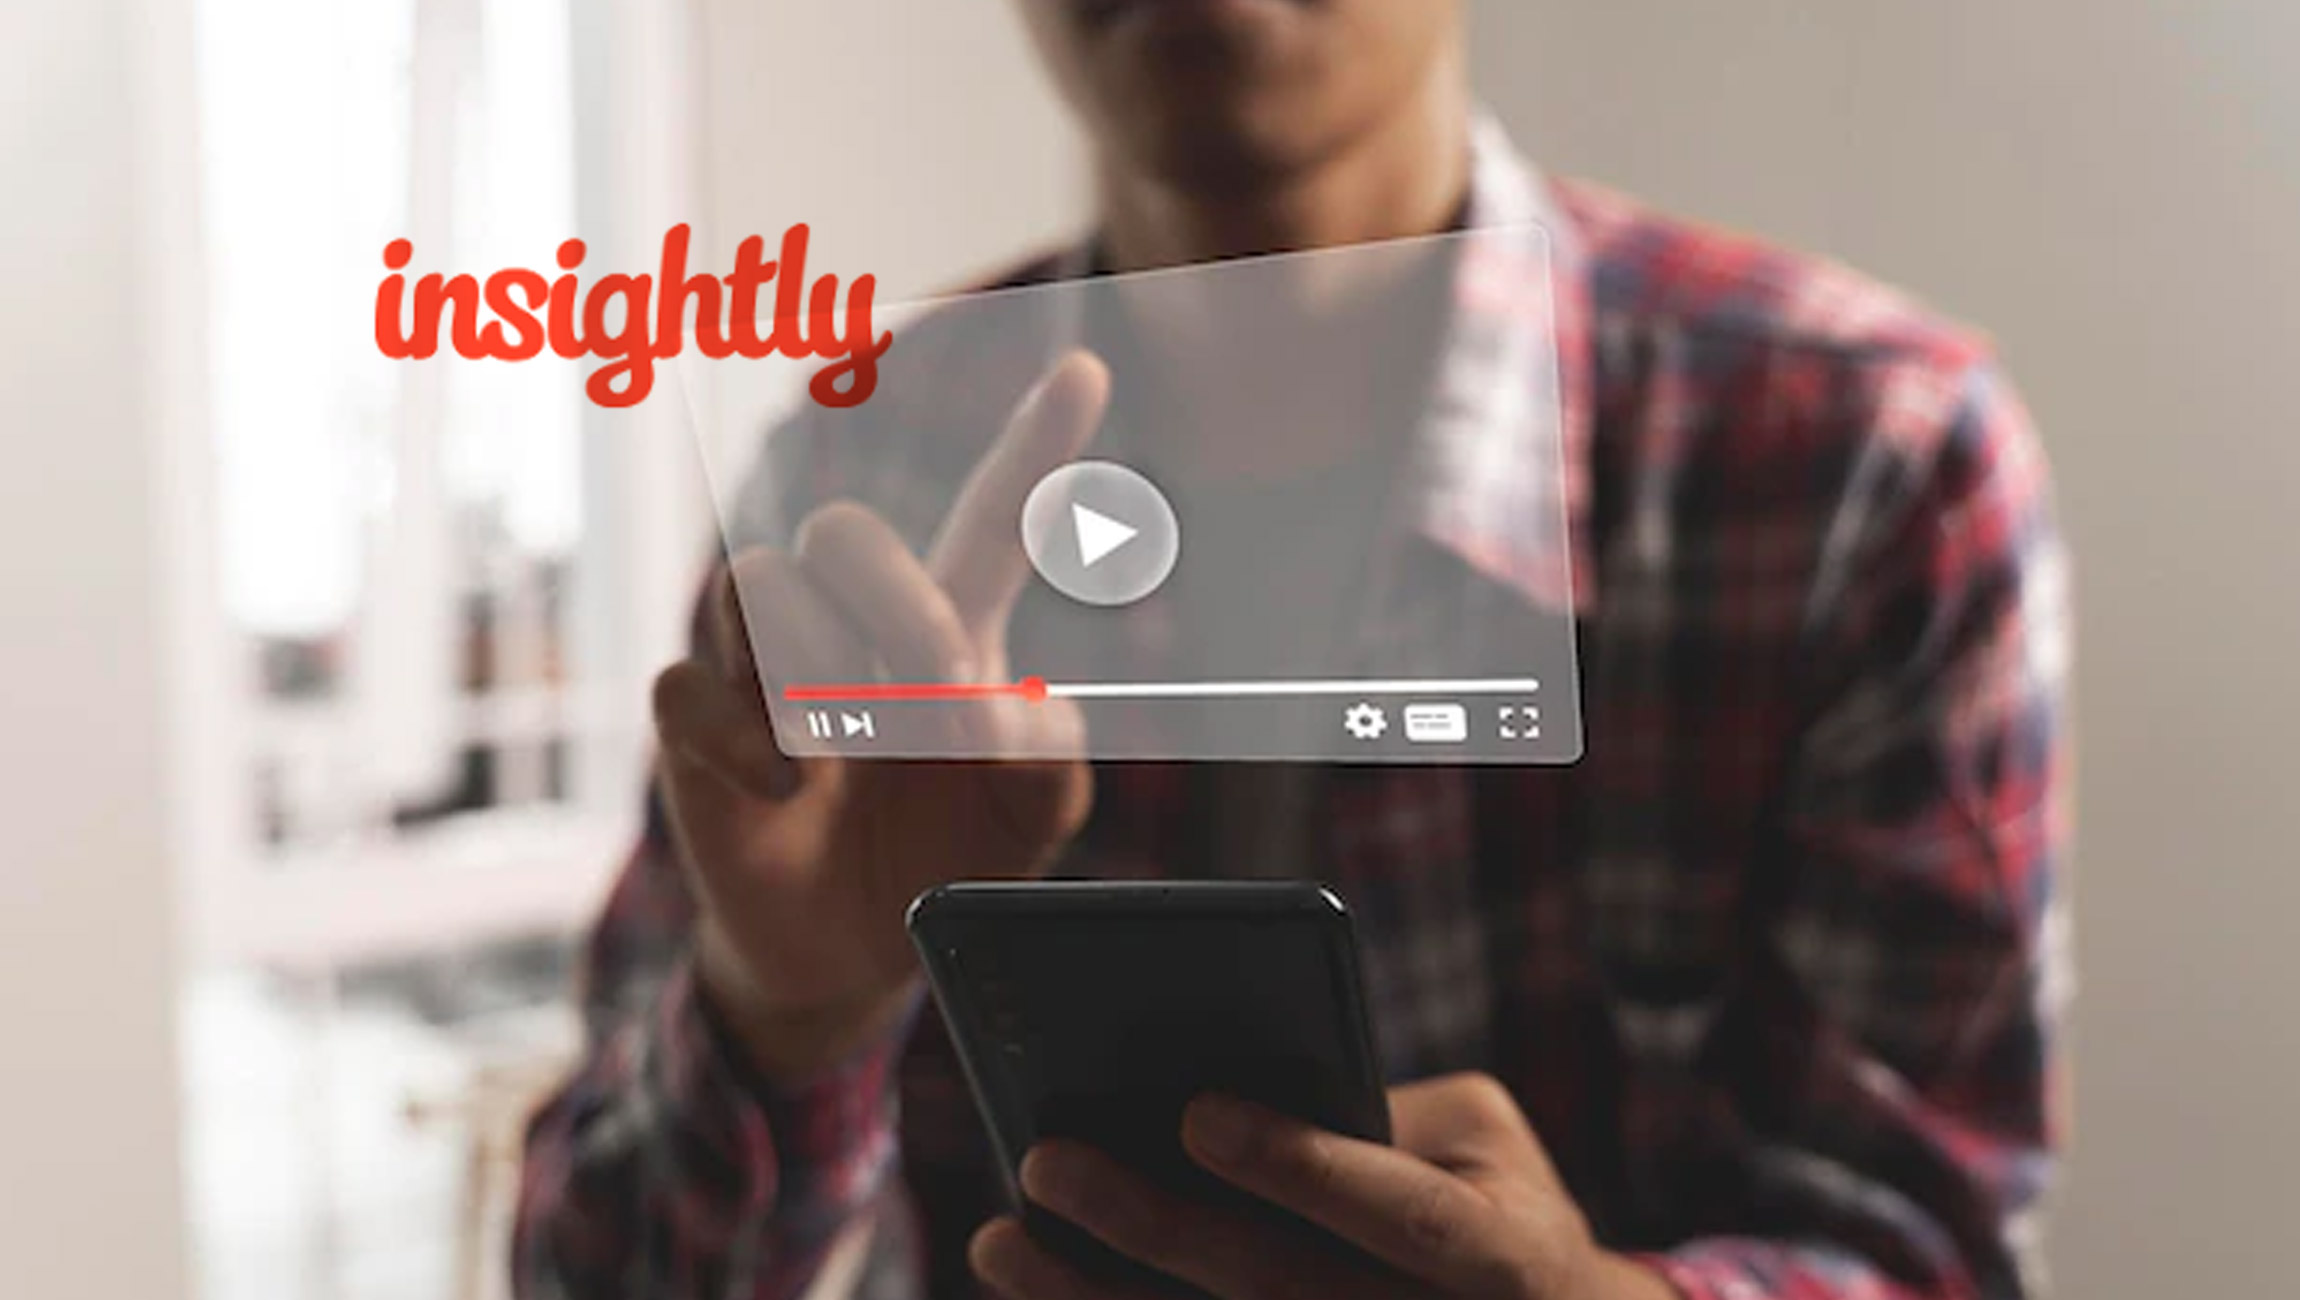 Insightly Launches New Weekly Video Series “Closing Time”